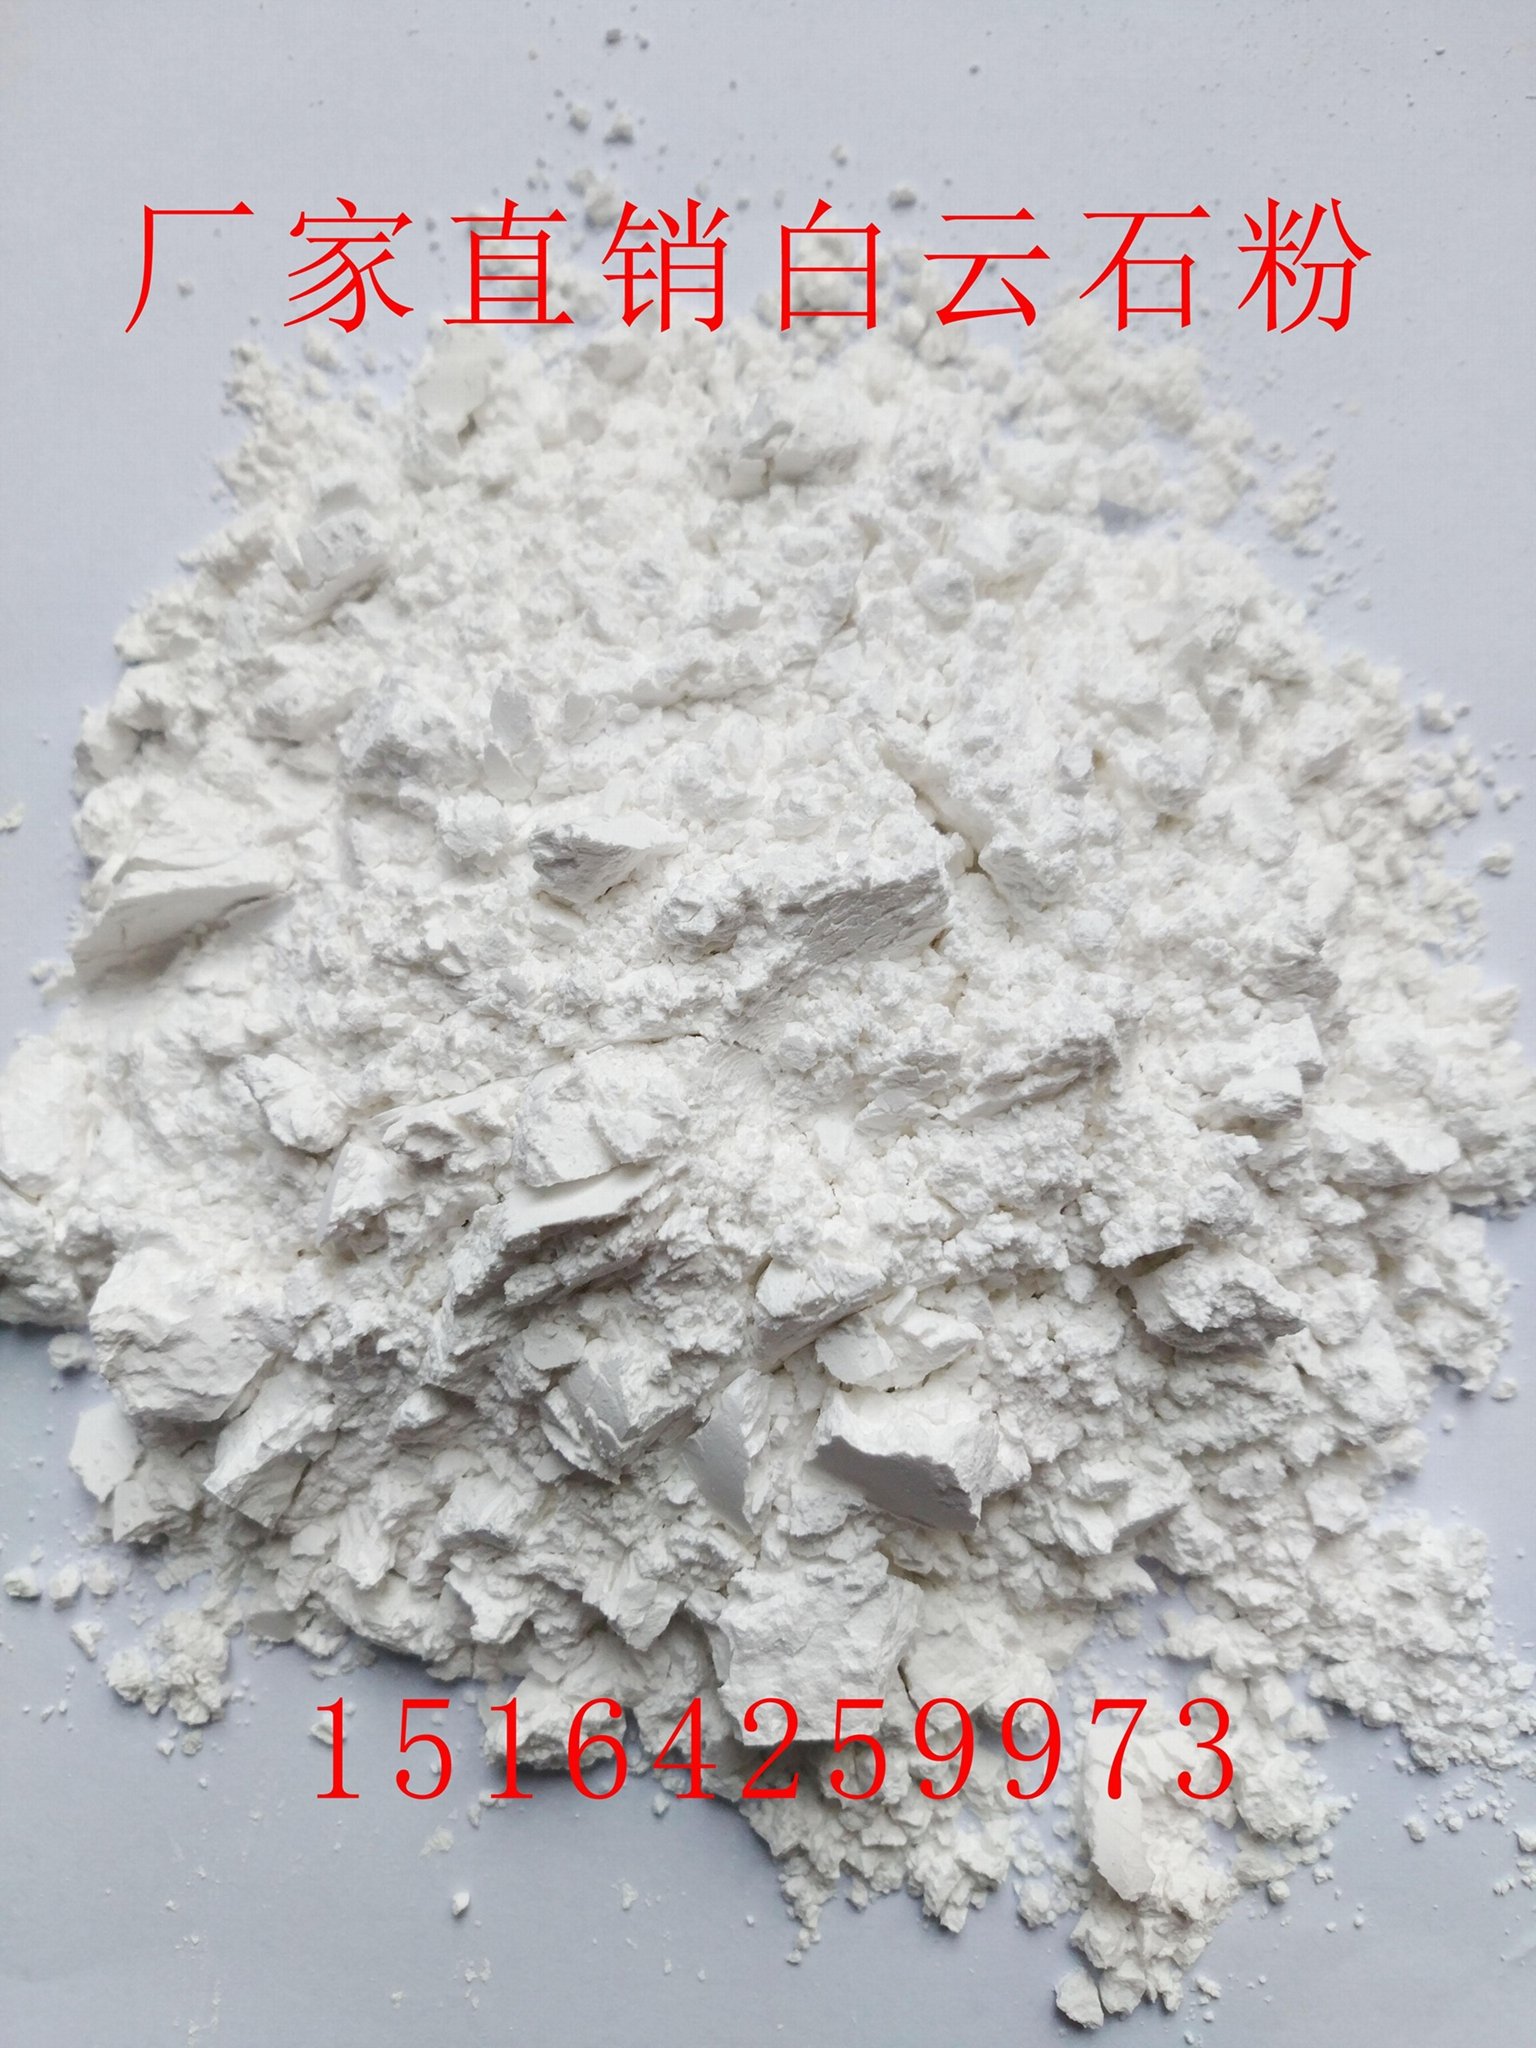 Factory directly sell ultra-fine dolomite powder 325 mesh to 1250 mesh 4